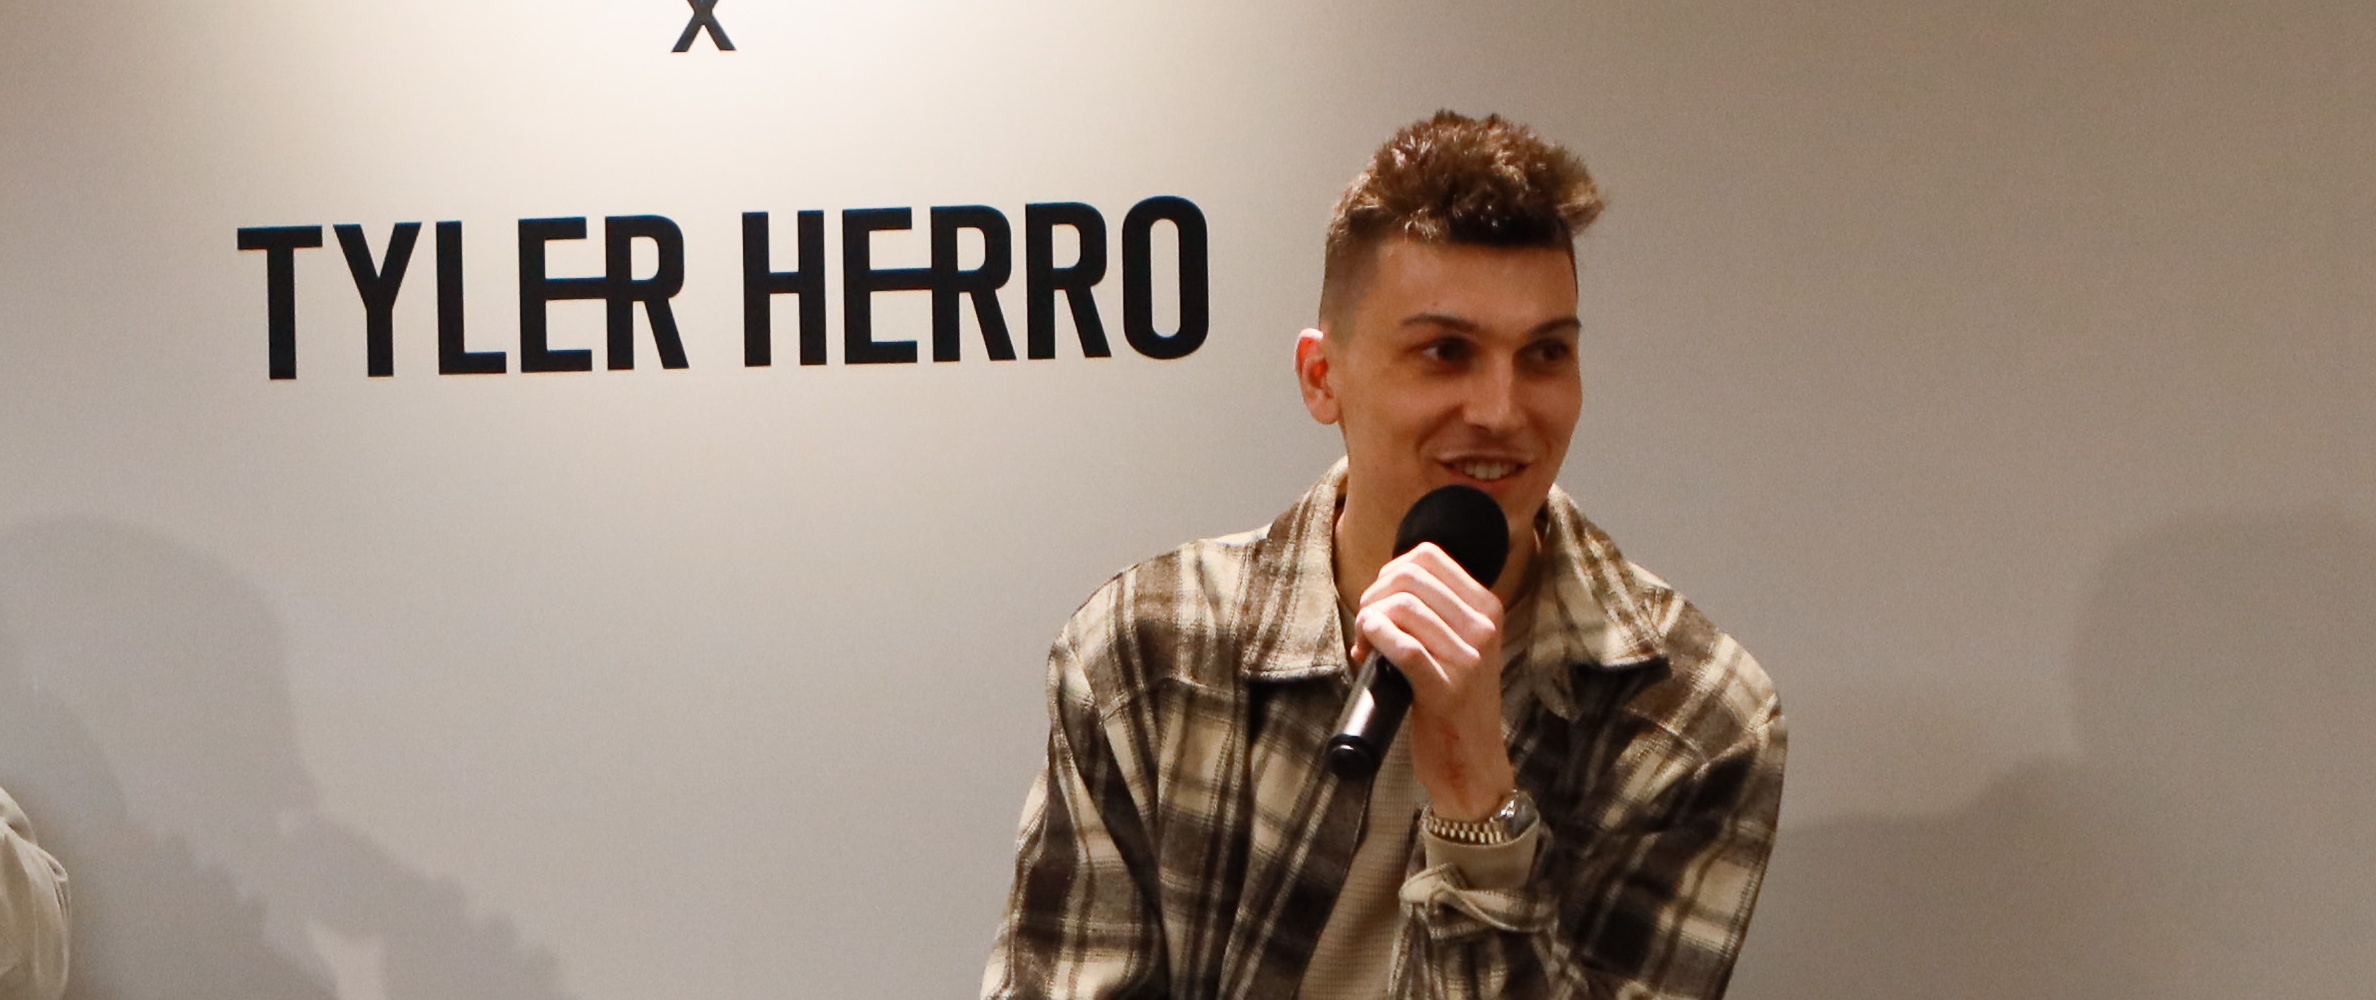 Hudson Jeans Inks Two-Year Partnership with NBA Star Tyler Herro